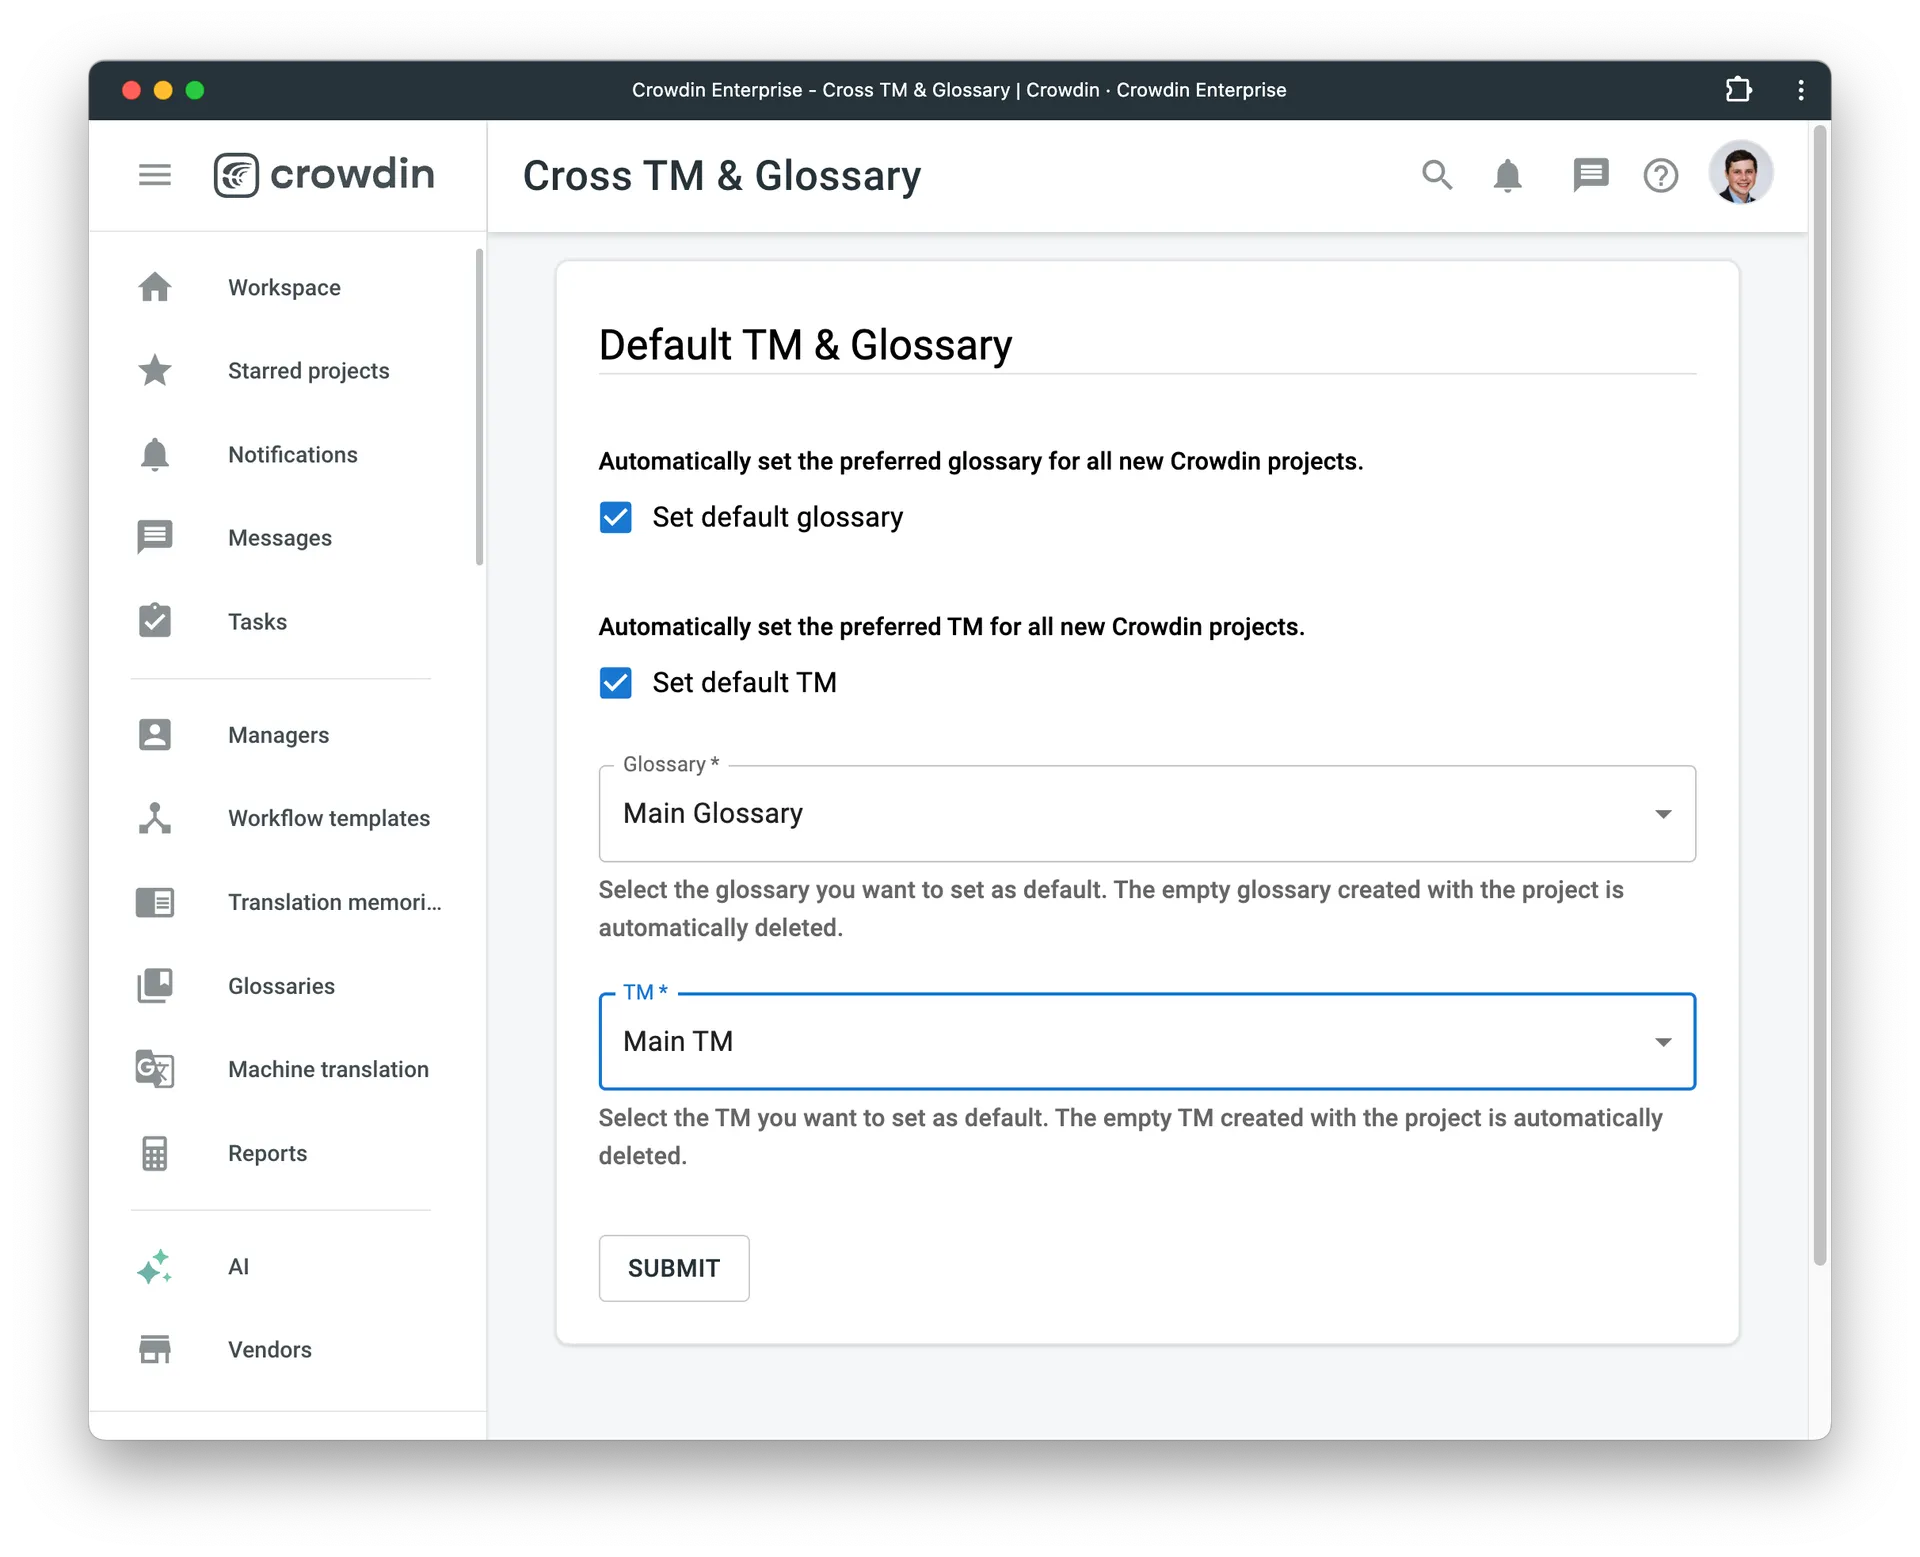 Configuring default TM and Glossary in Crowdin